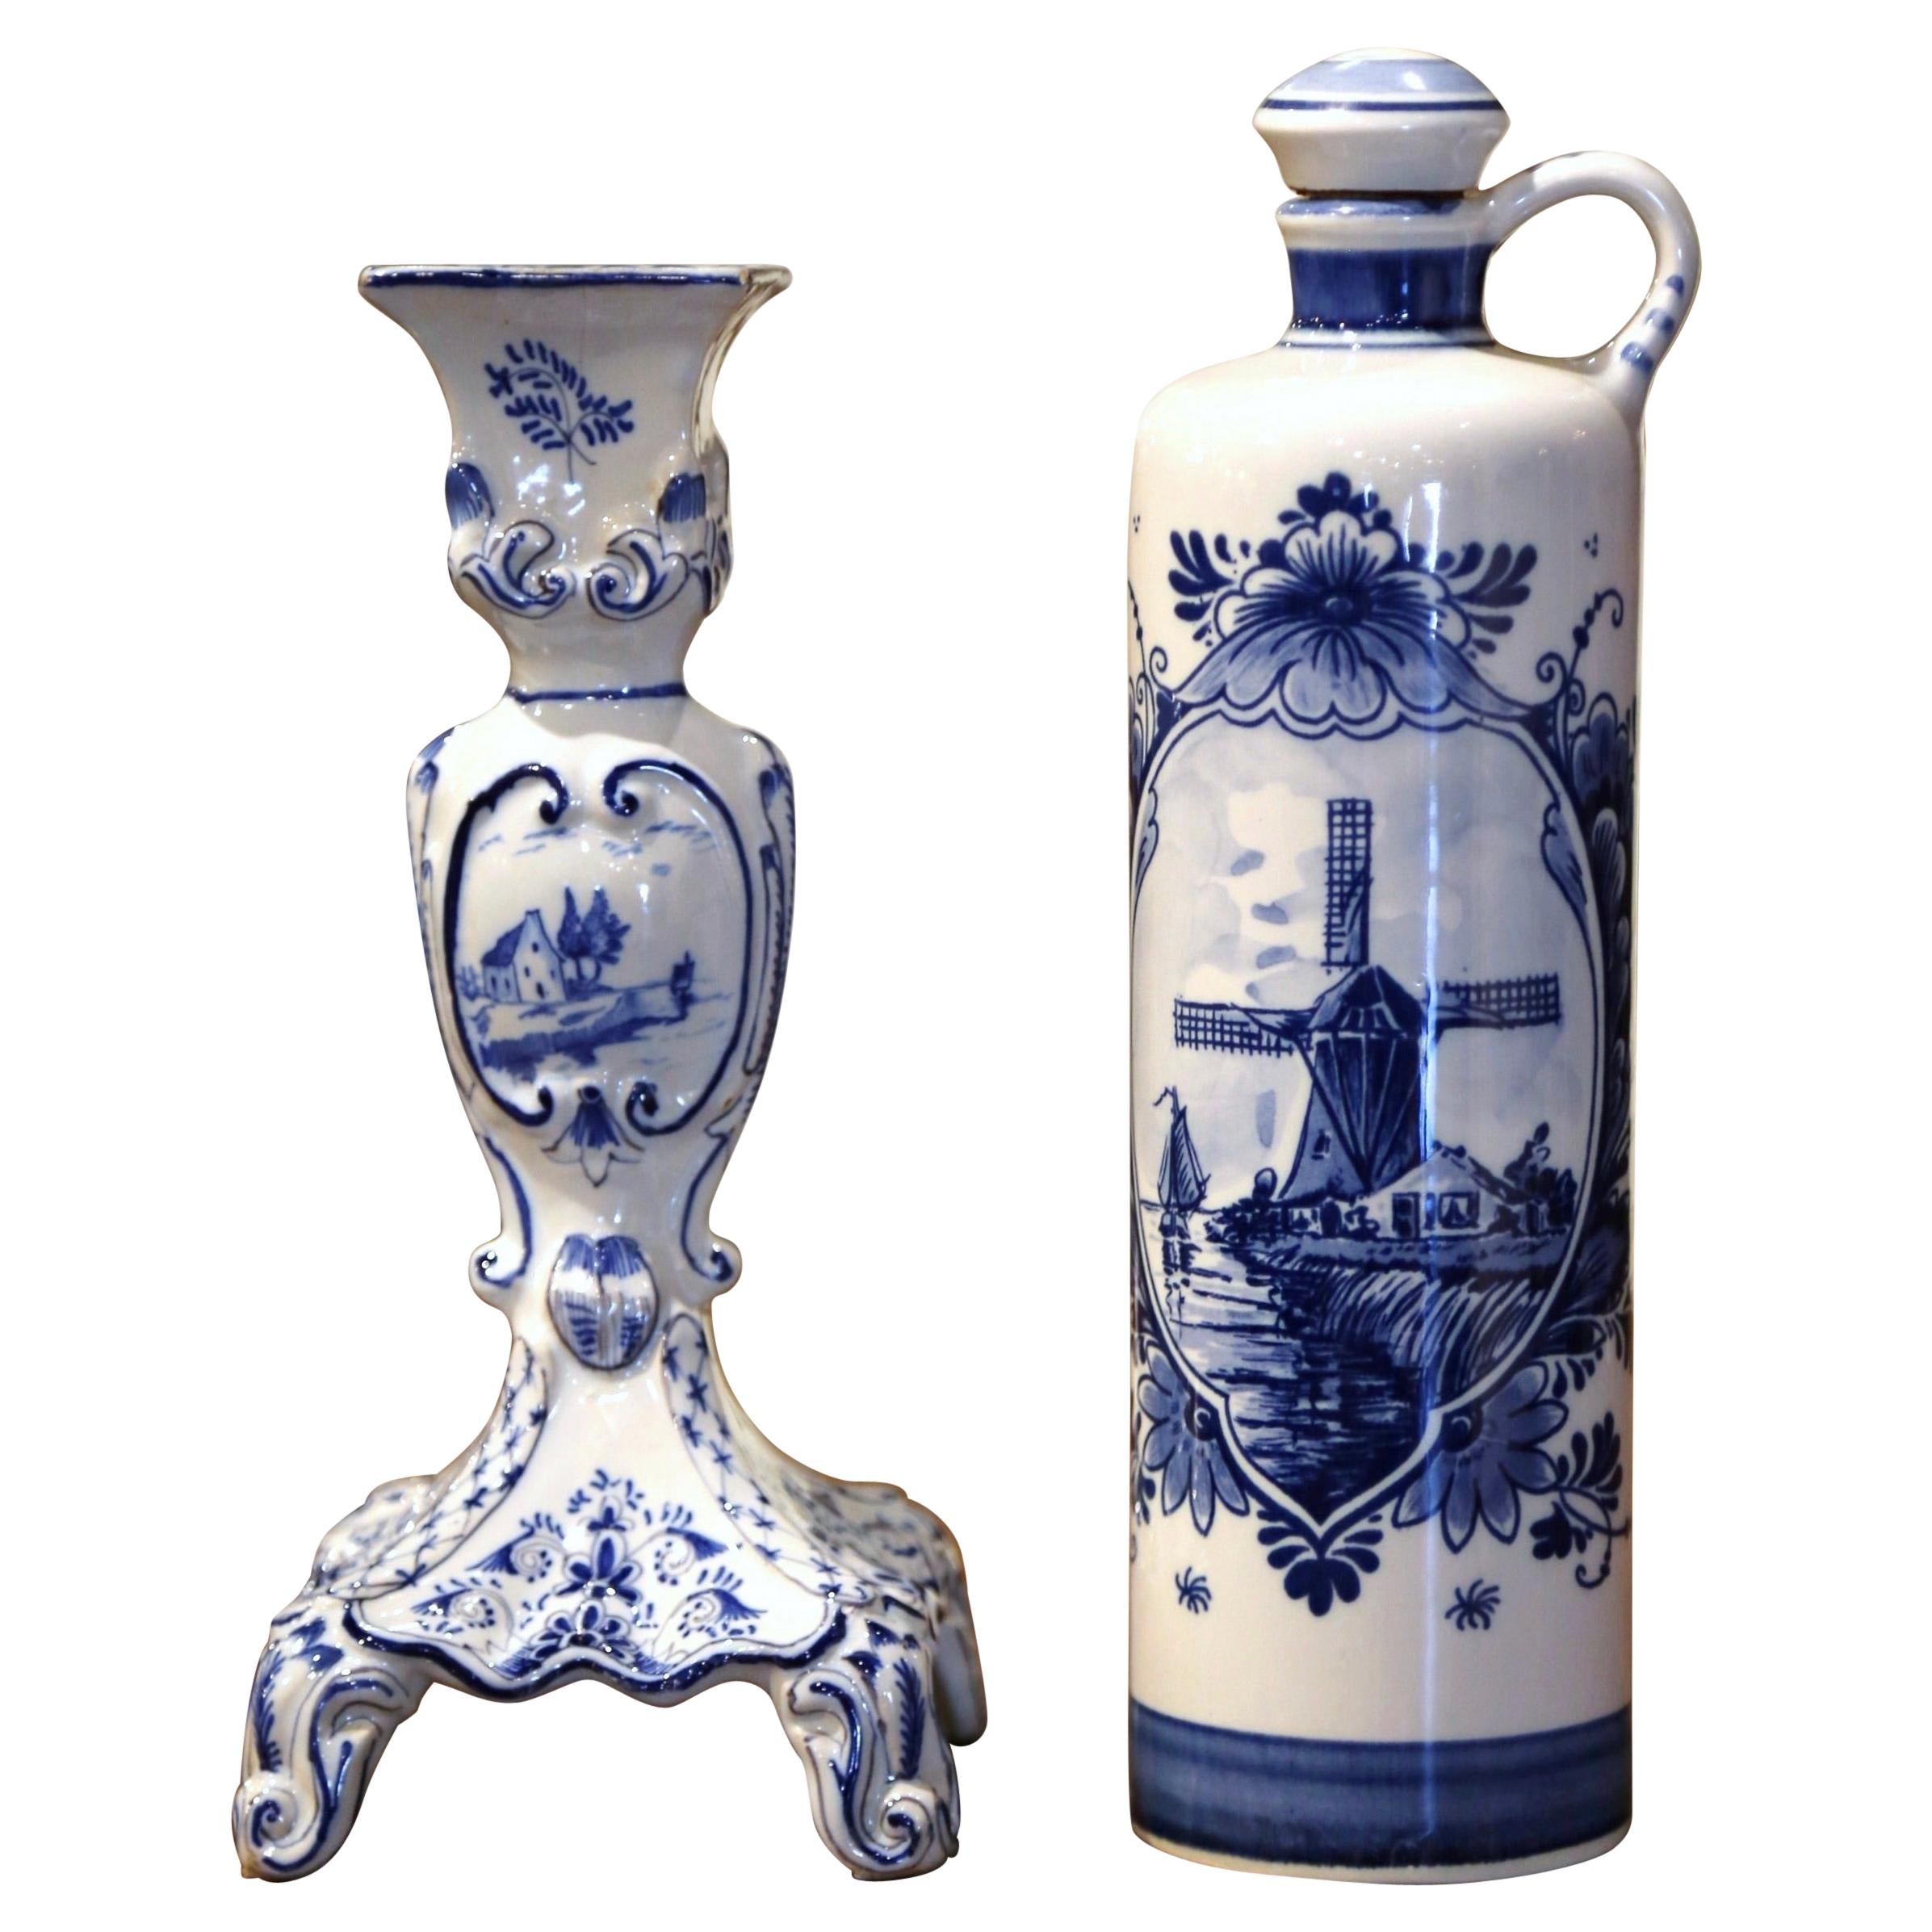 Dutch Blue and White Painted Faience Delft Olive Oil Bottle and Candle Holder